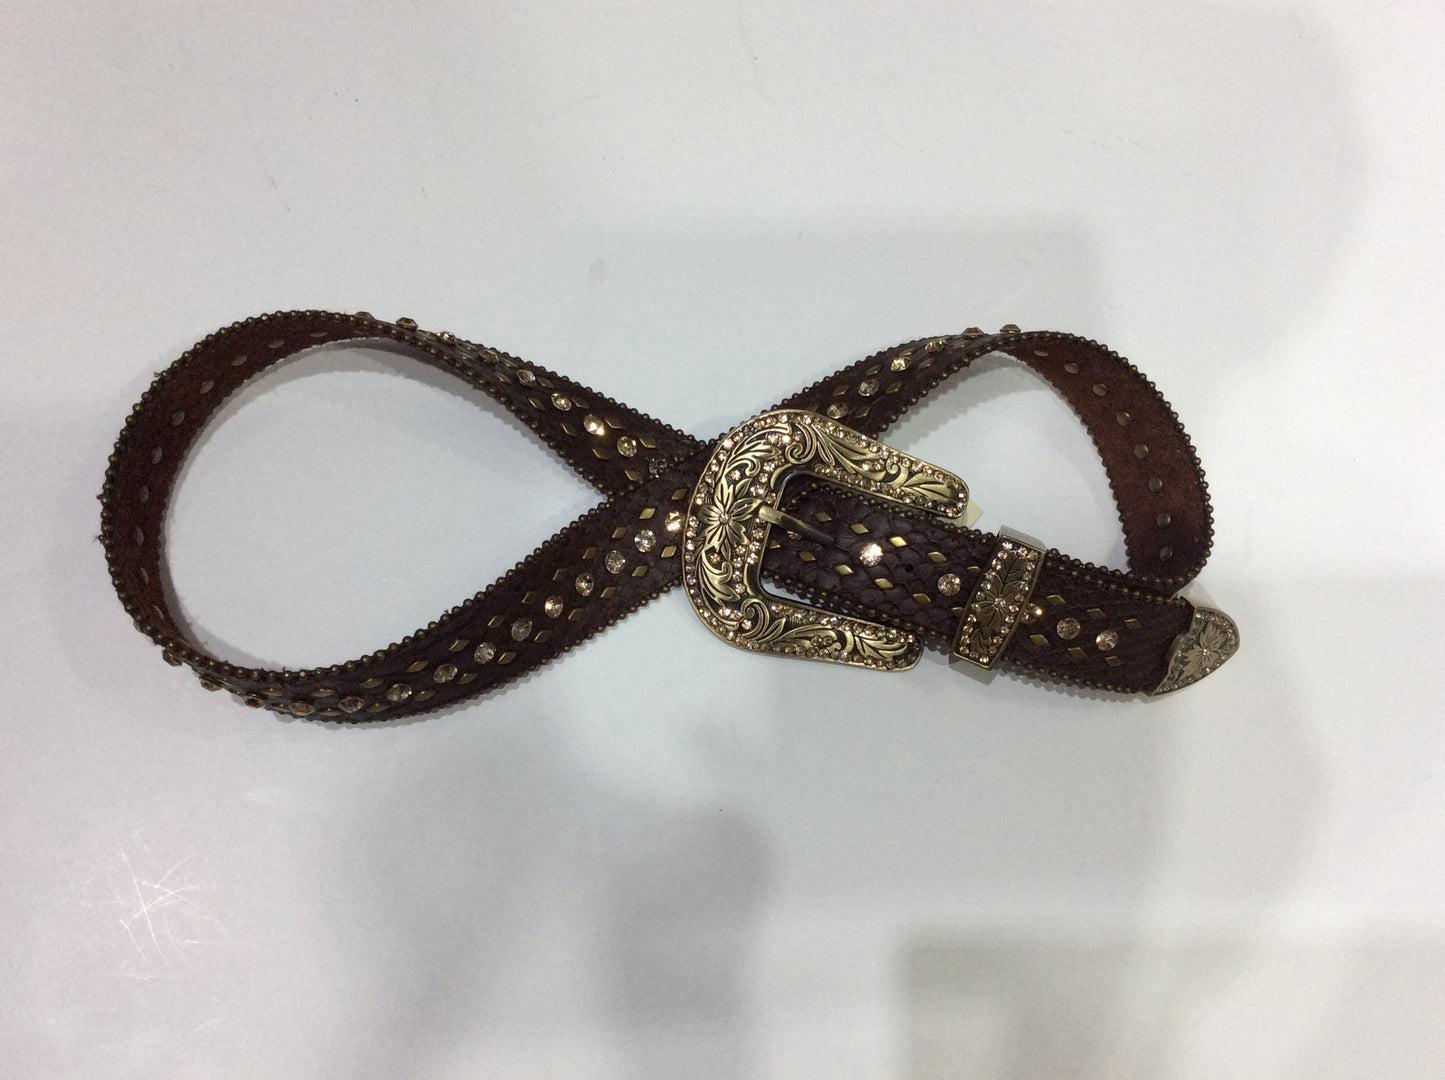 Belts-Wide Brown Leather with Bronze Crystal, Beading and Stud Embellishment